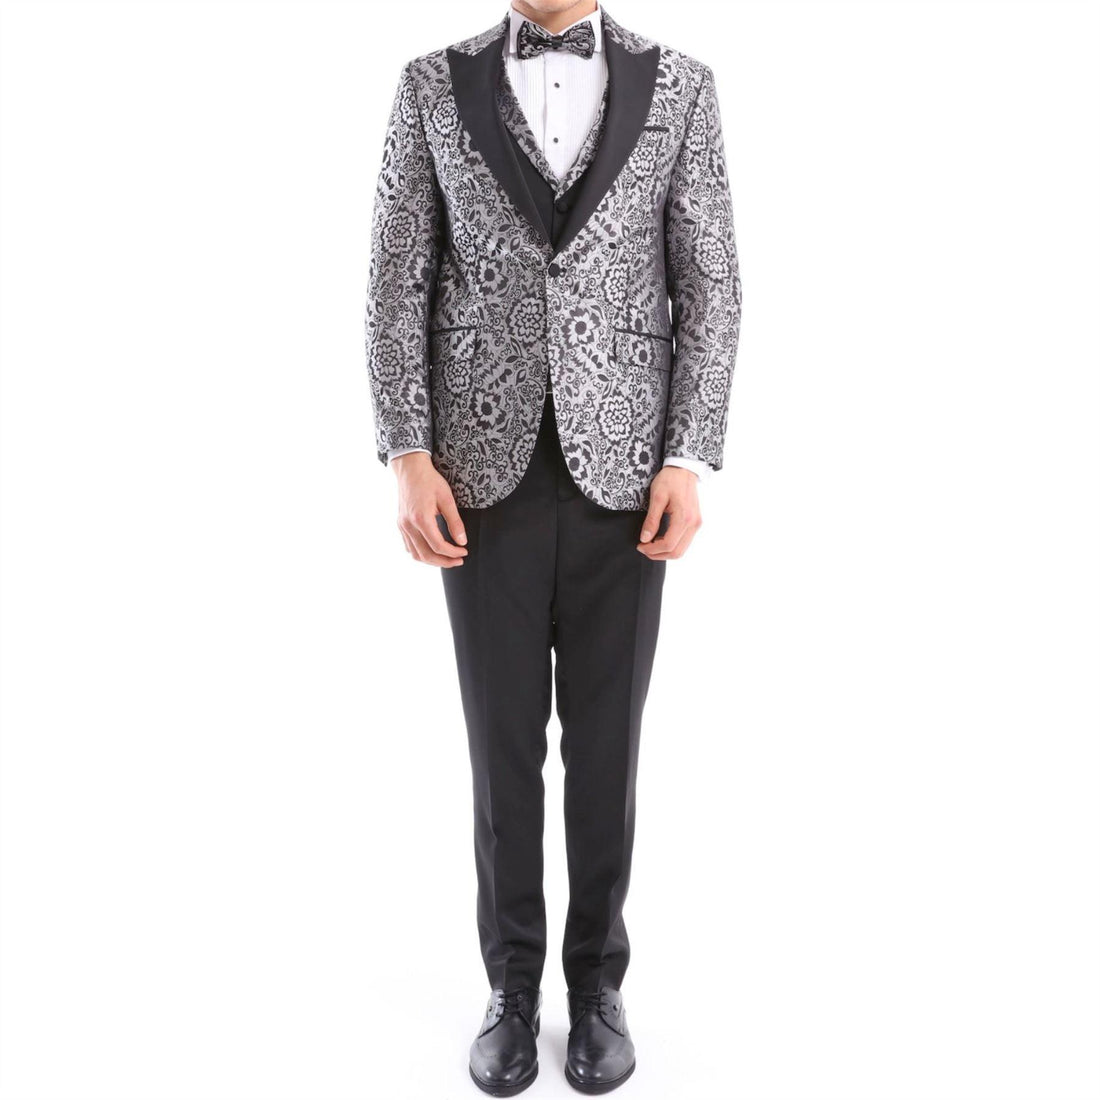 Mens Silver Floral Black Tuxedo Suit 3 Piece Wedding Prom Party Grooms Ceremony - Knighthood Store